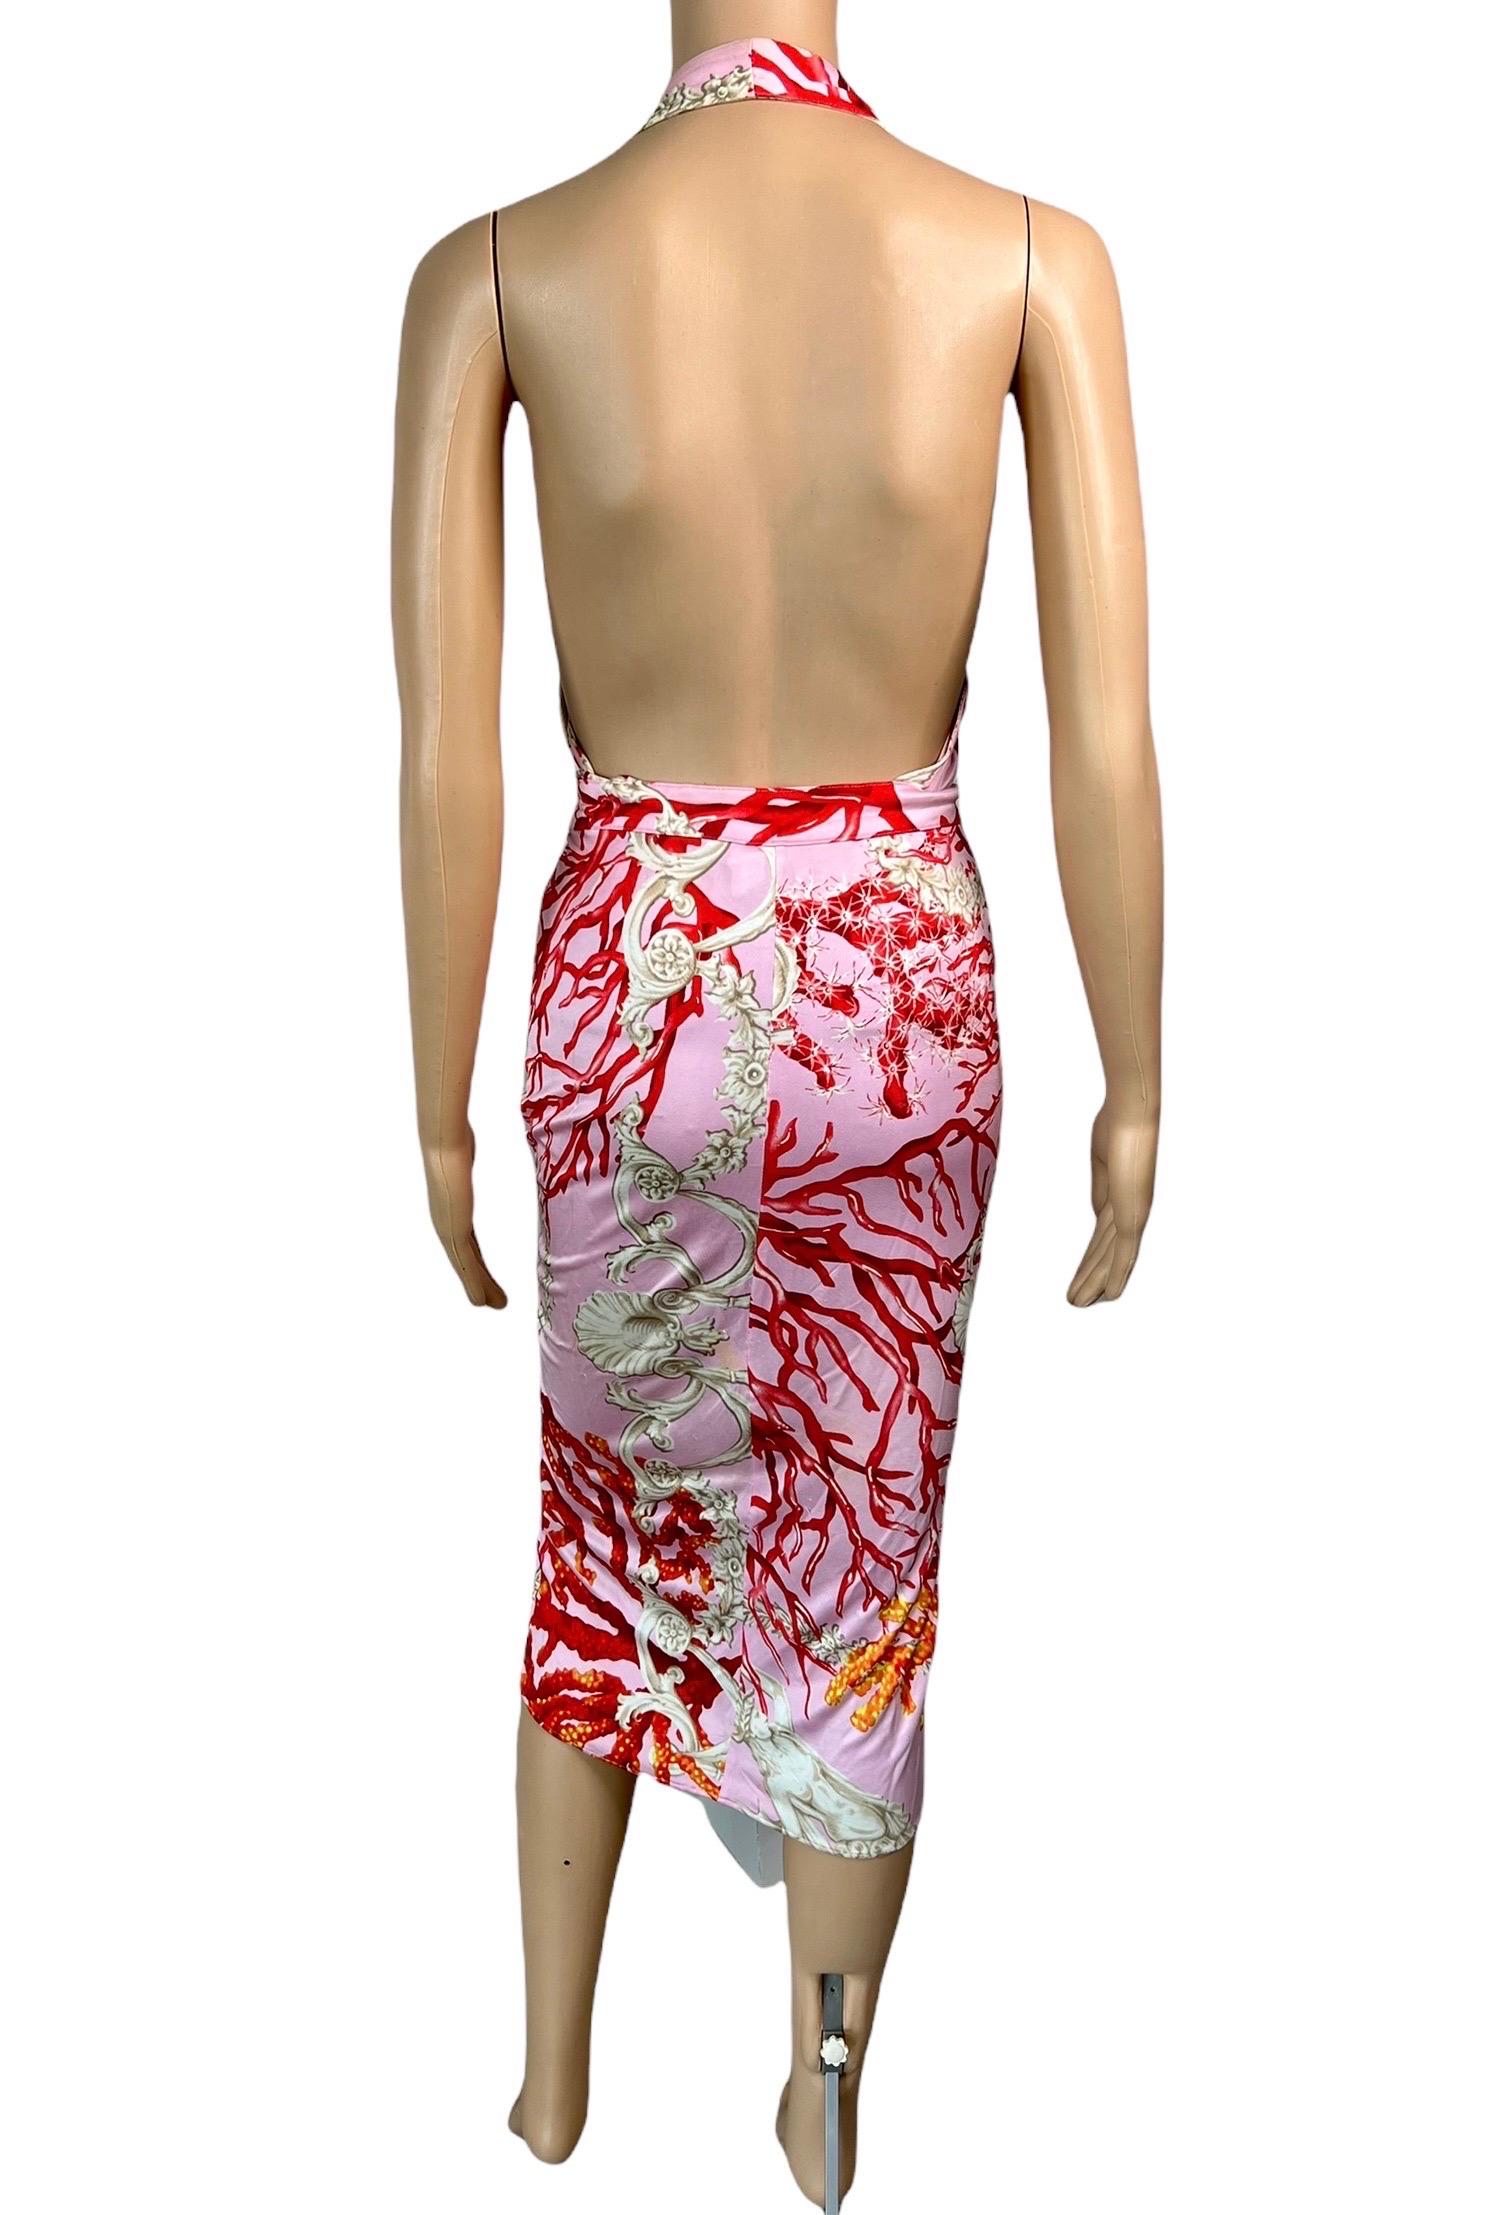 Versace S/S 2005 Plunging Neckline Backless Seashell Print Belted Wrap Dress For Sale 1